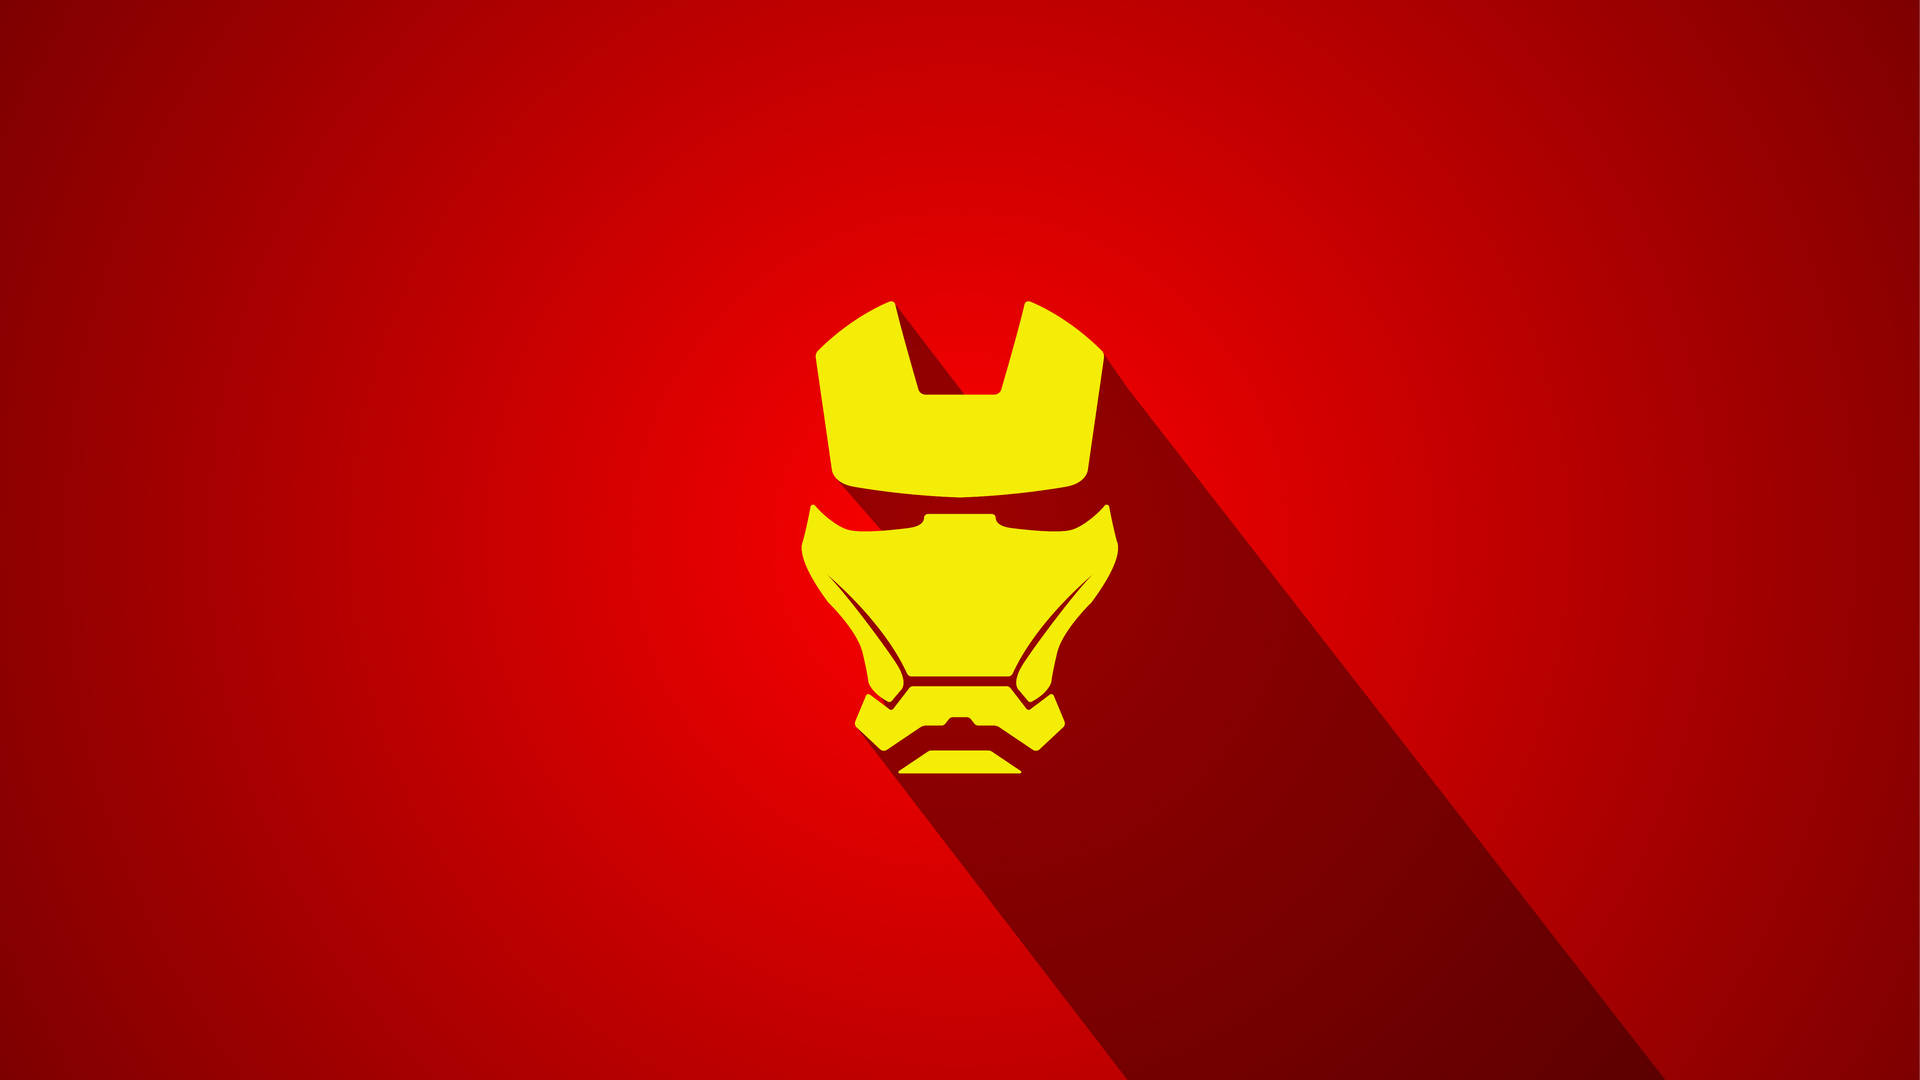 Cool Iron Man Mask Casting Shadow Background